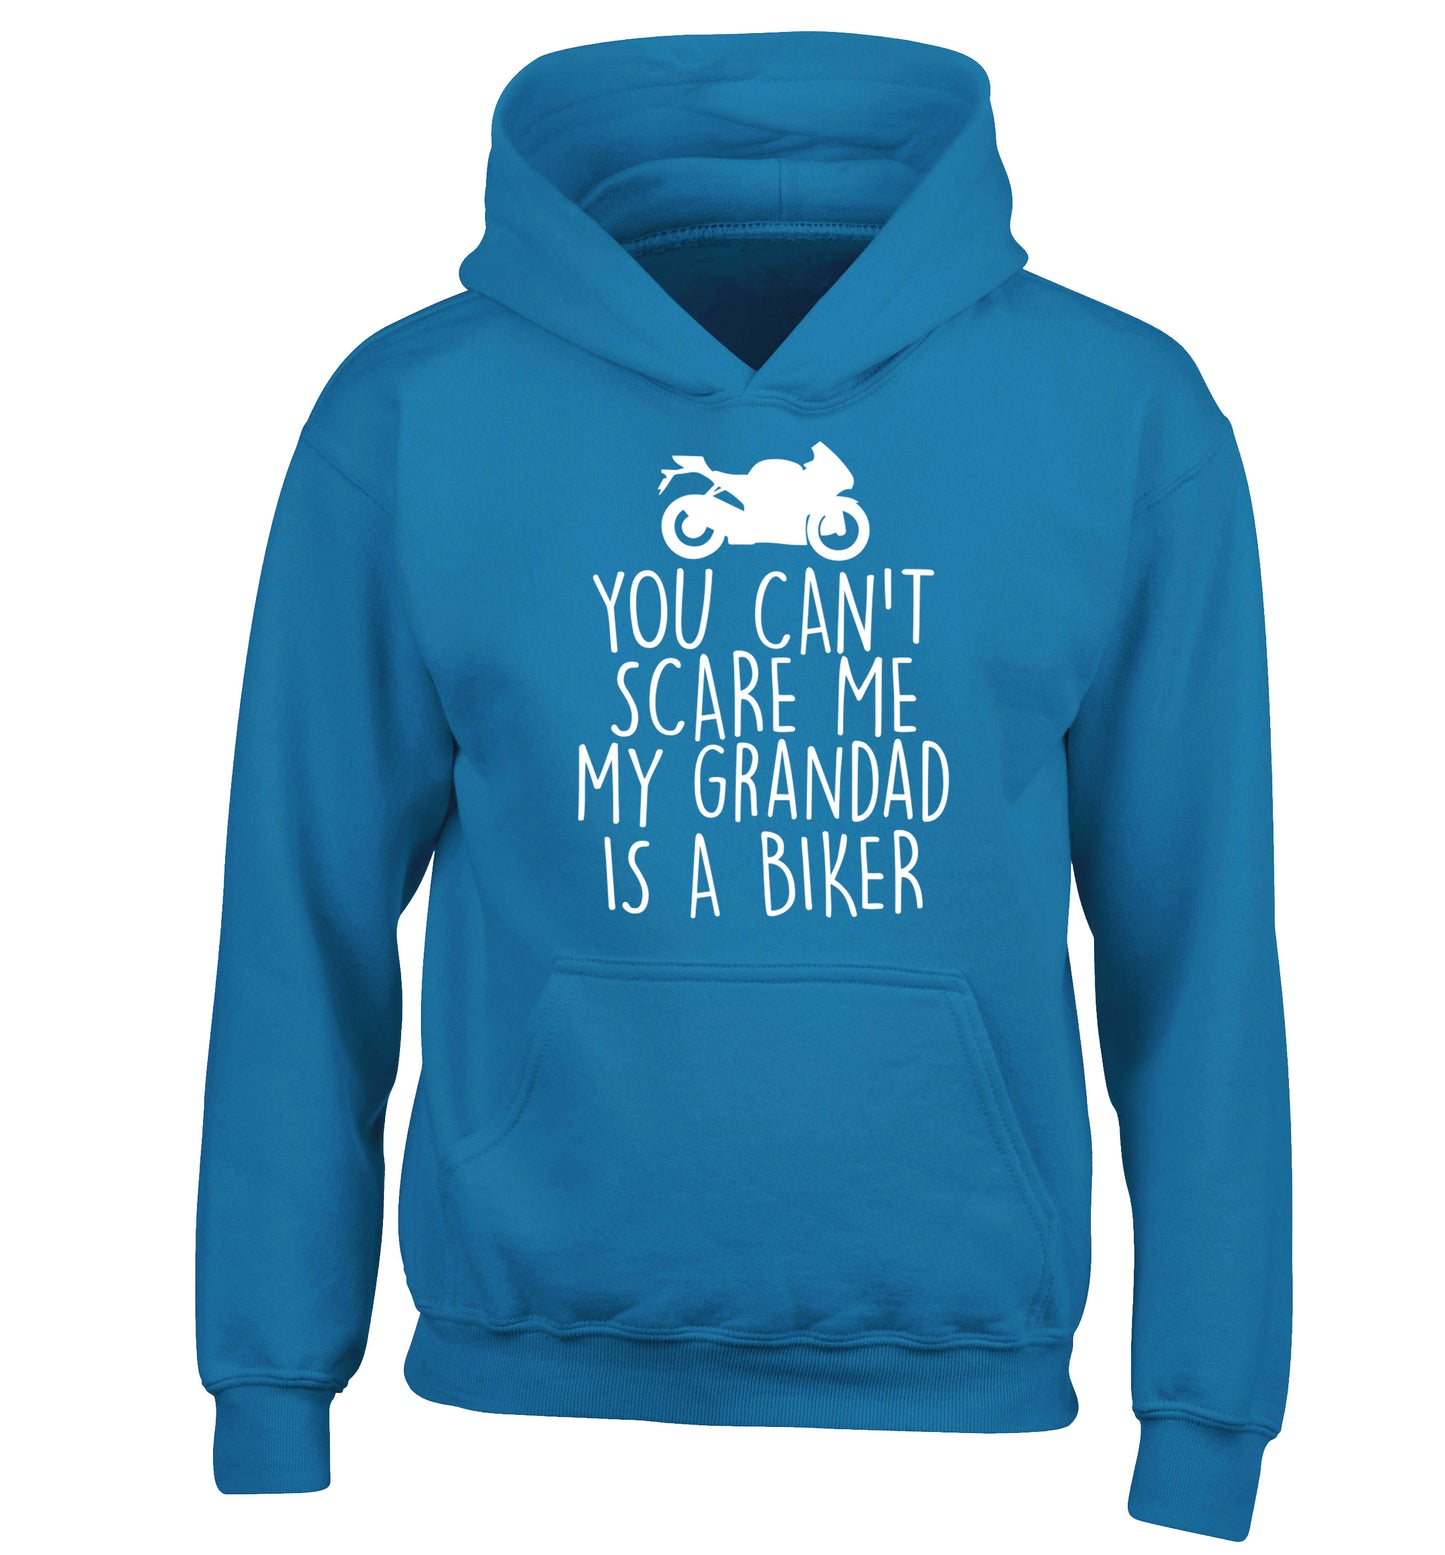 You can't scare me my grandad is a biker children's blue hoodie 12-13 Years